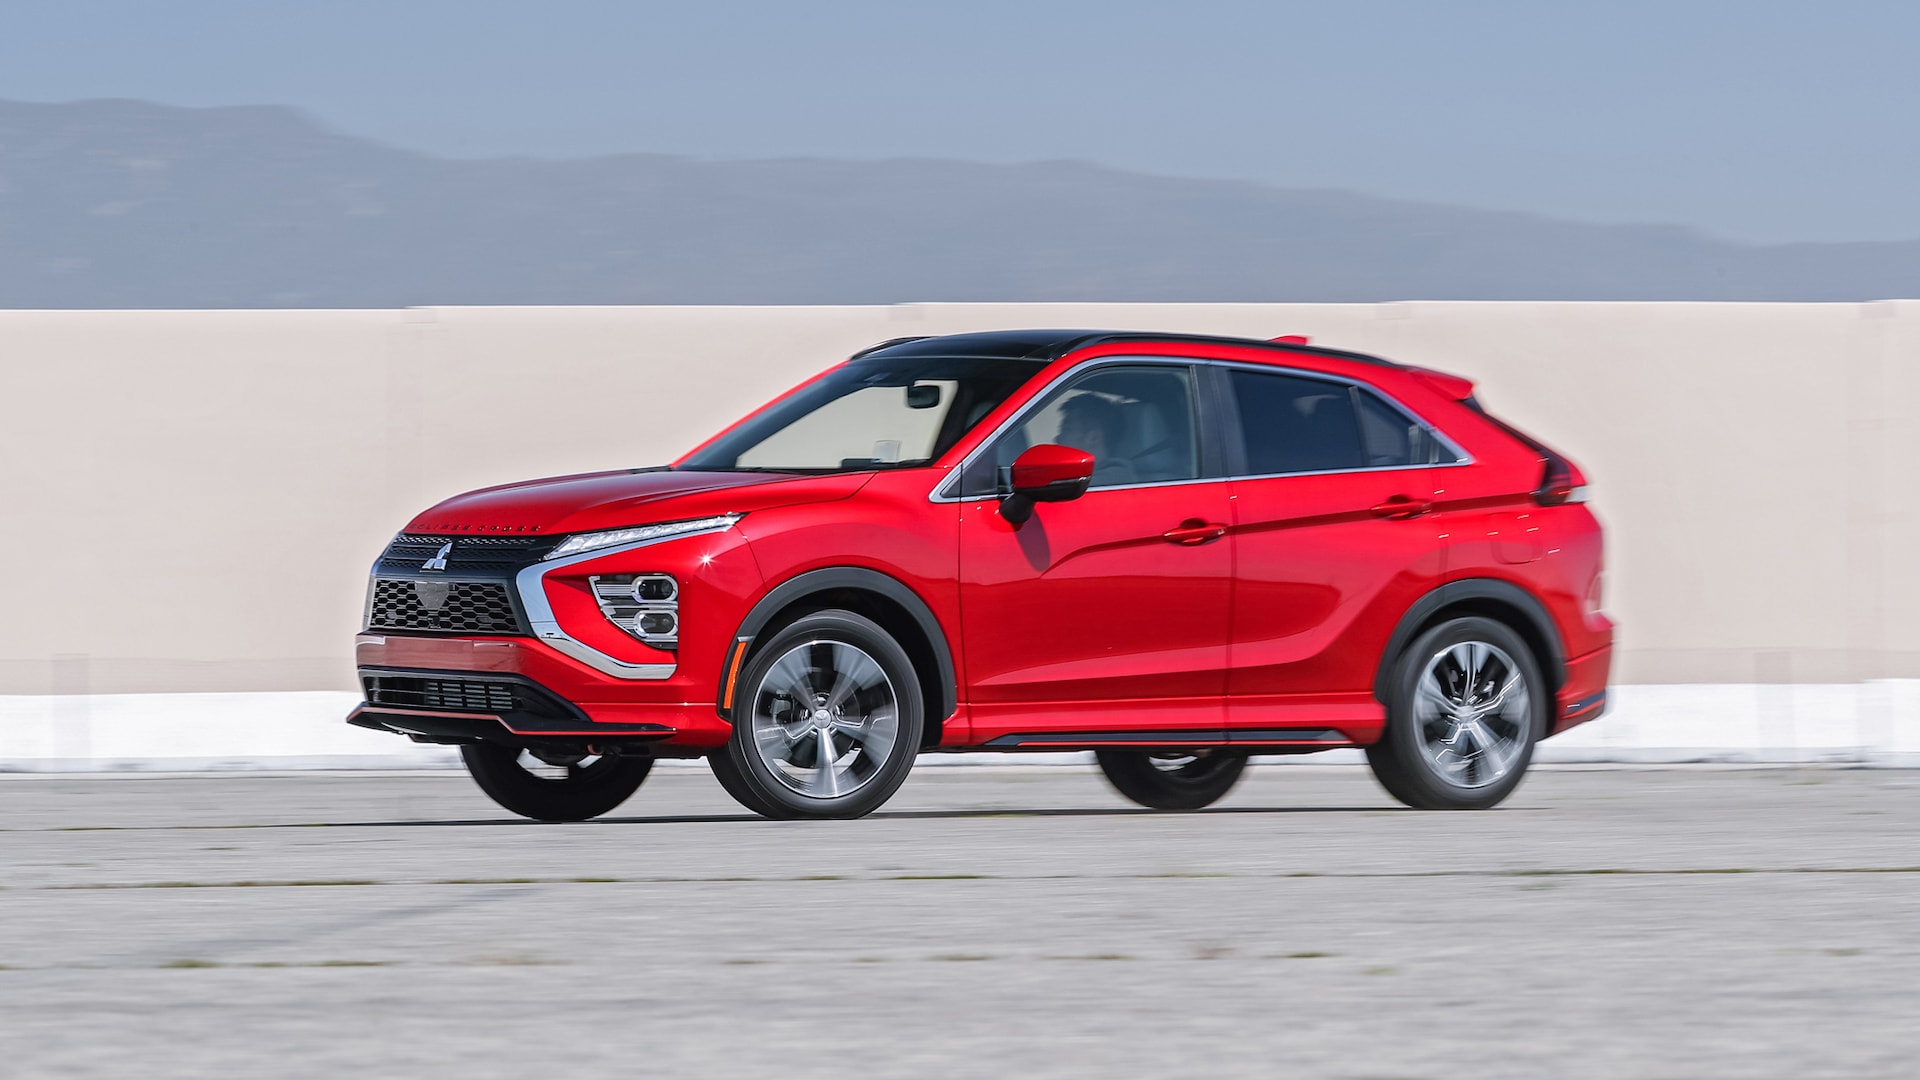 2022 Mitsubishi Eclipse Cross Prices, Reviews, and Photos - MotorTrend